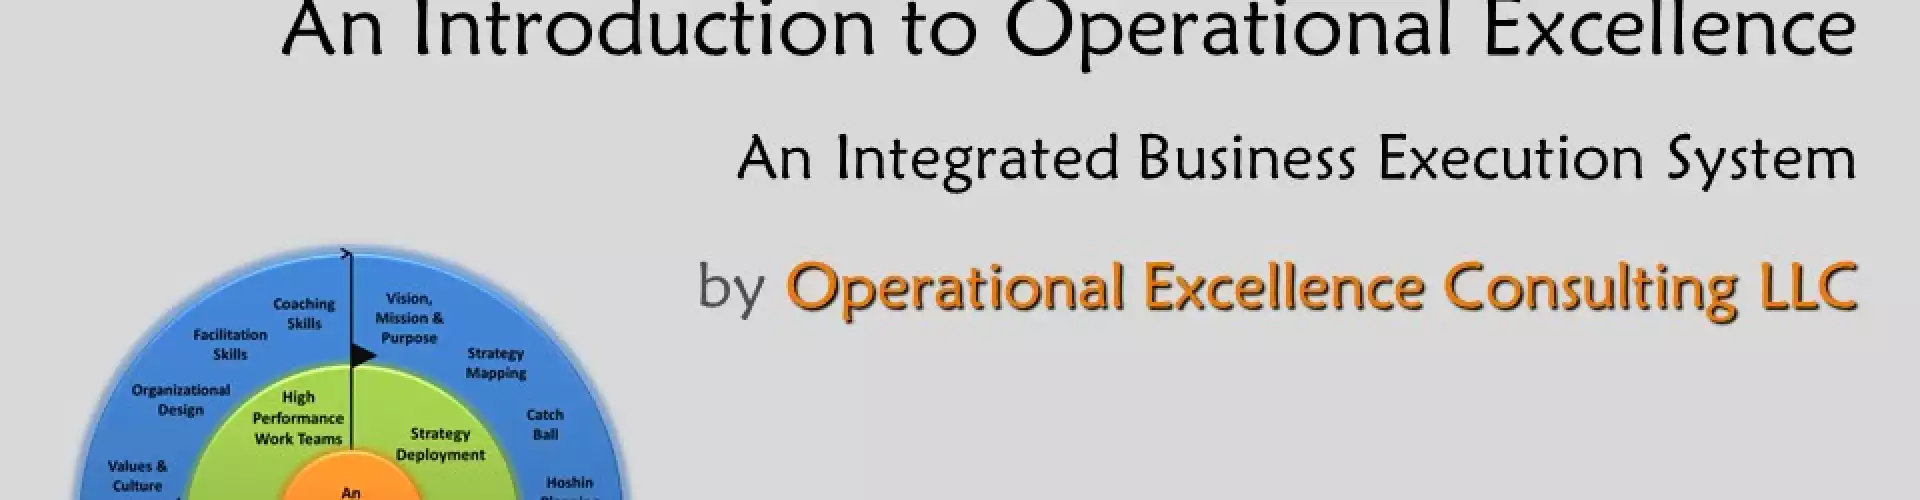 Introduction to Operational Excellence